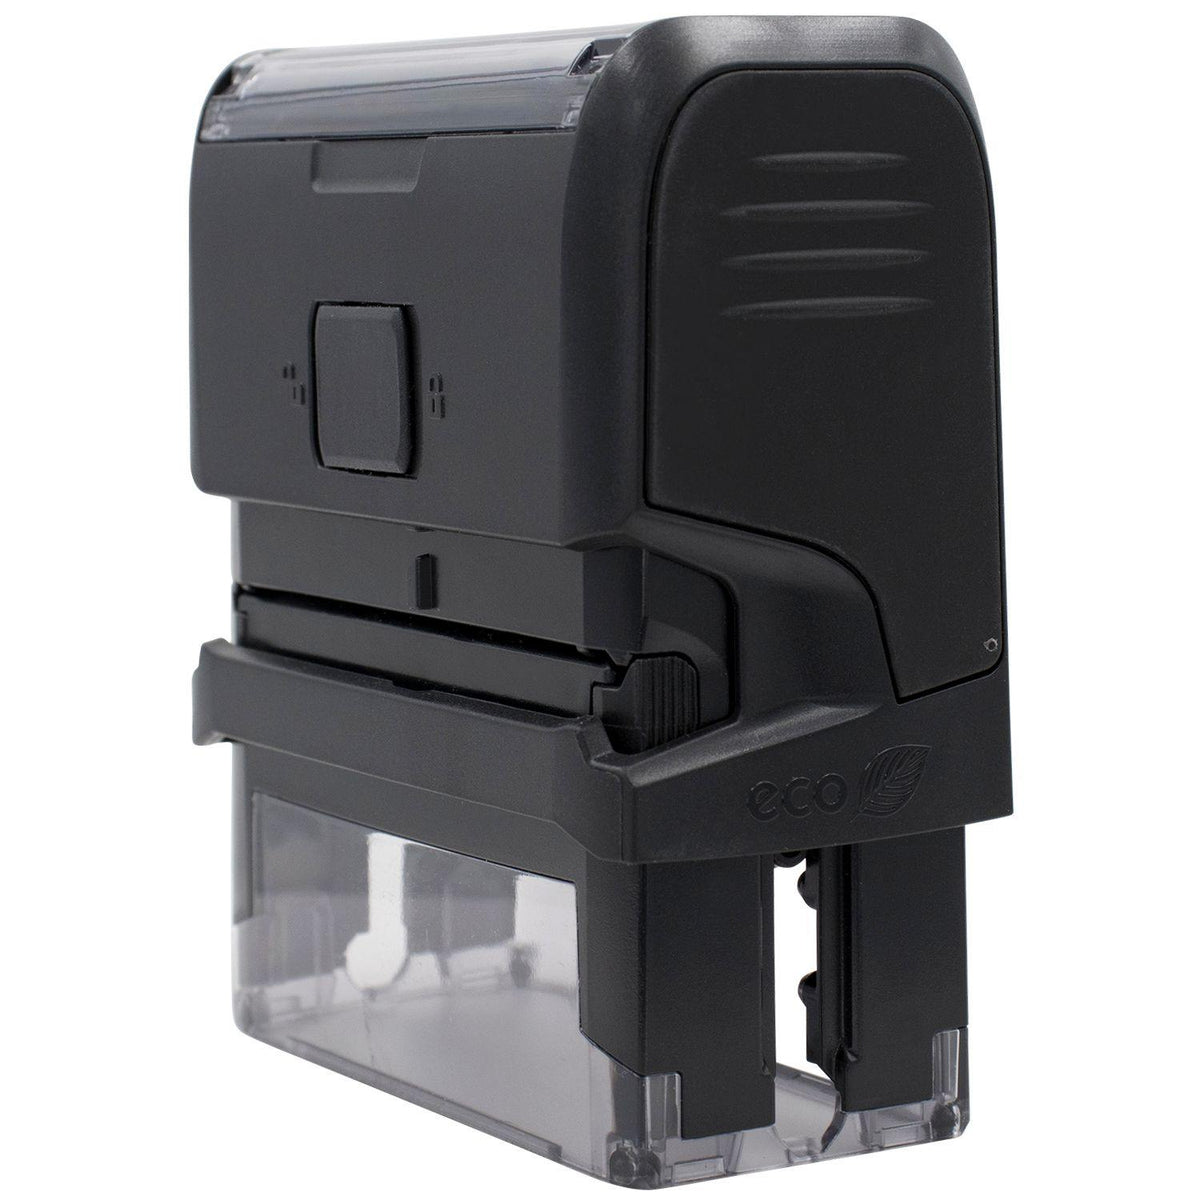 Large Self-Inking Parcel Post Air Stamp - Engineer Seal Stamps - Brand_Trodat, Impression Size_Large, Stamp Type_Self-Inking Stamp, Type of Use_Postal &amp; Mailing, Type of Use_Shipping &amp; Receiving